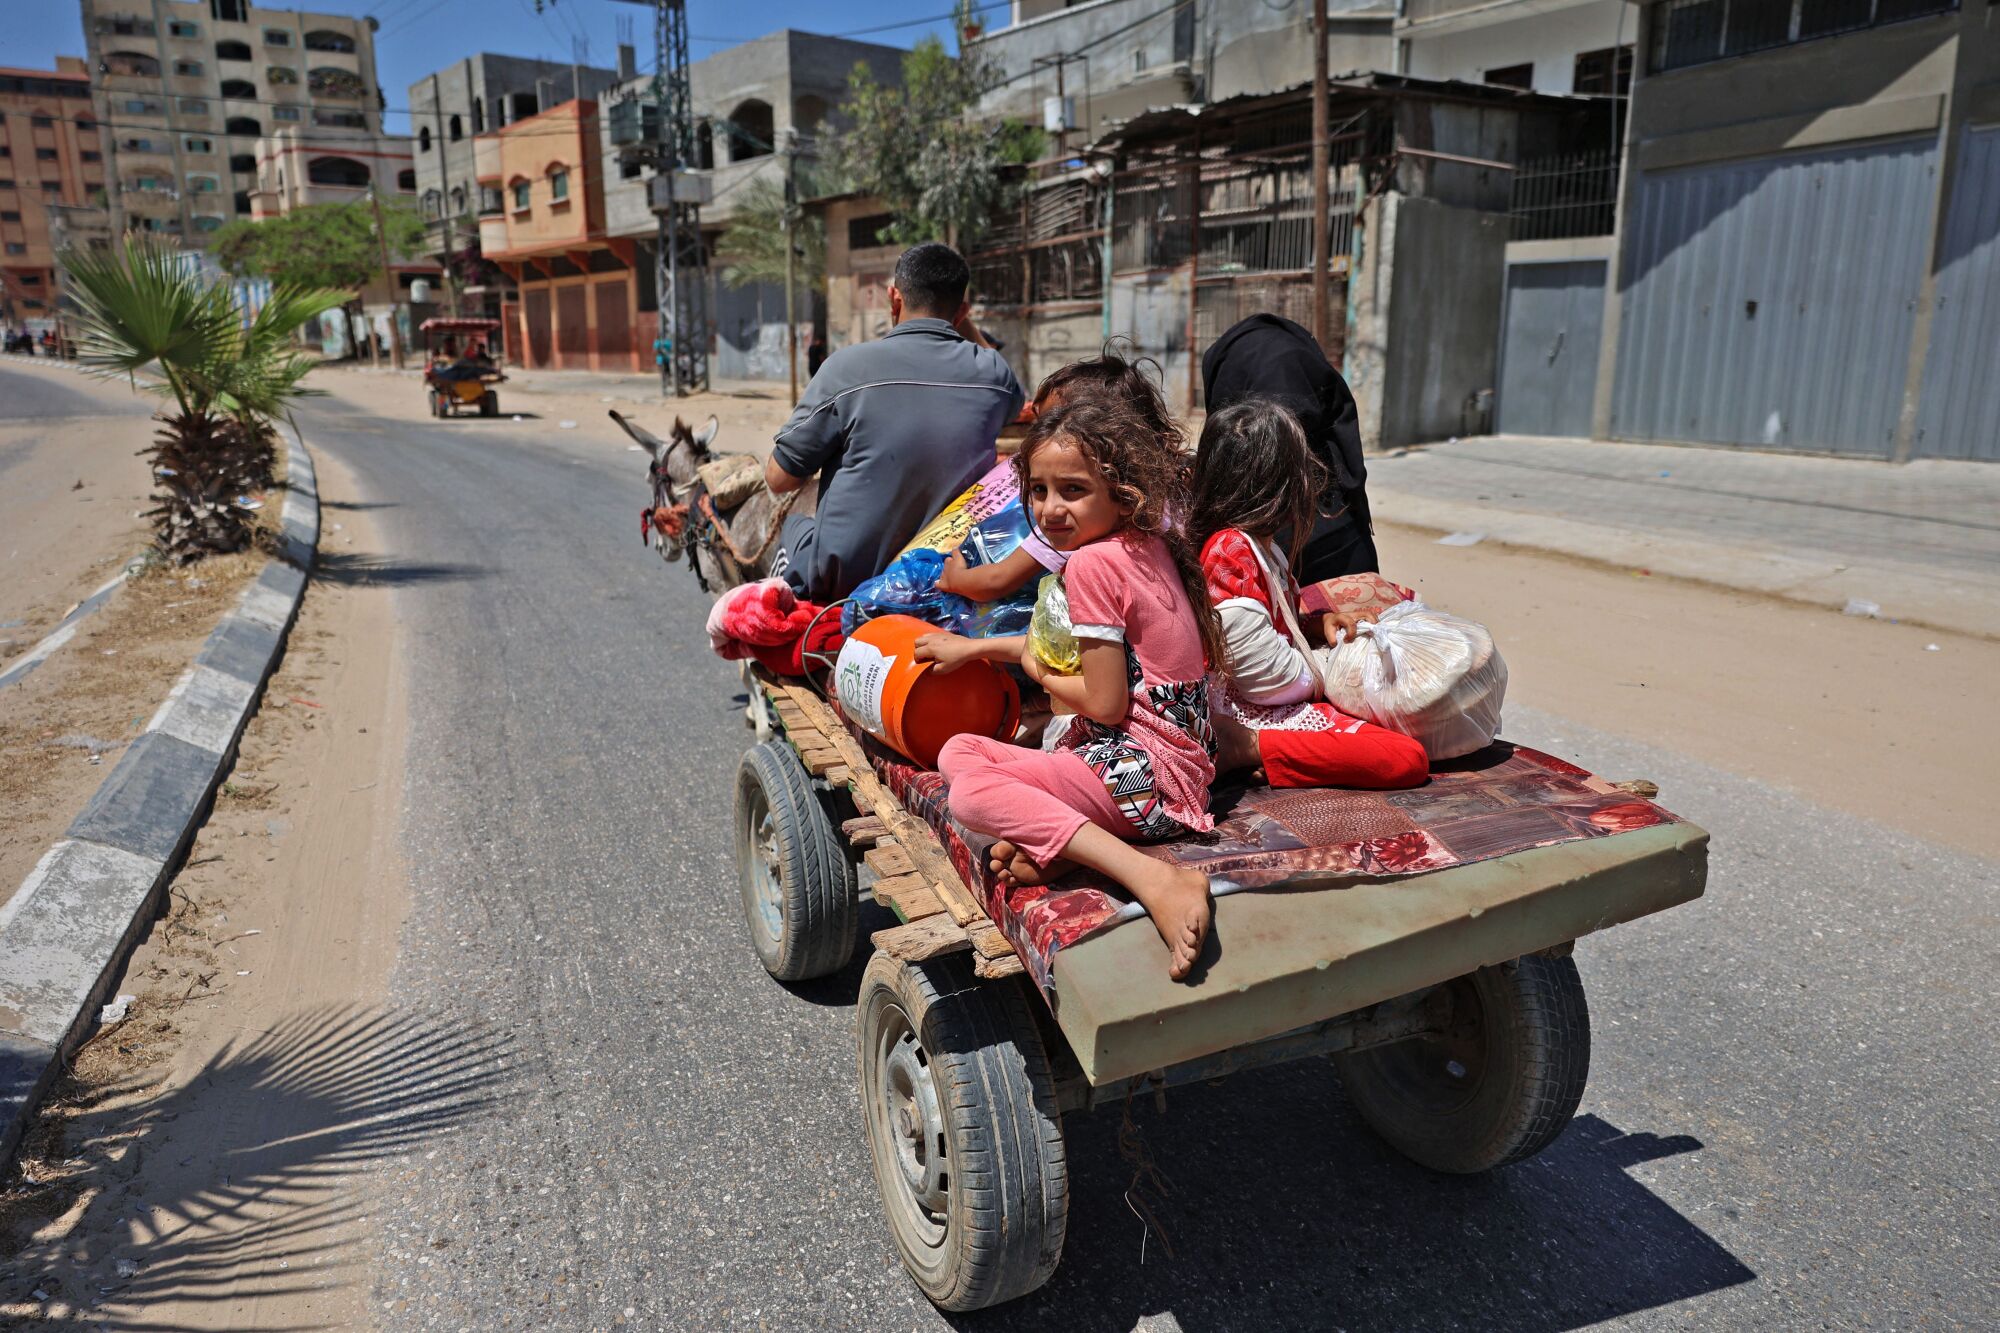 A Palestinian family flees on a cart pulled by a donkey.